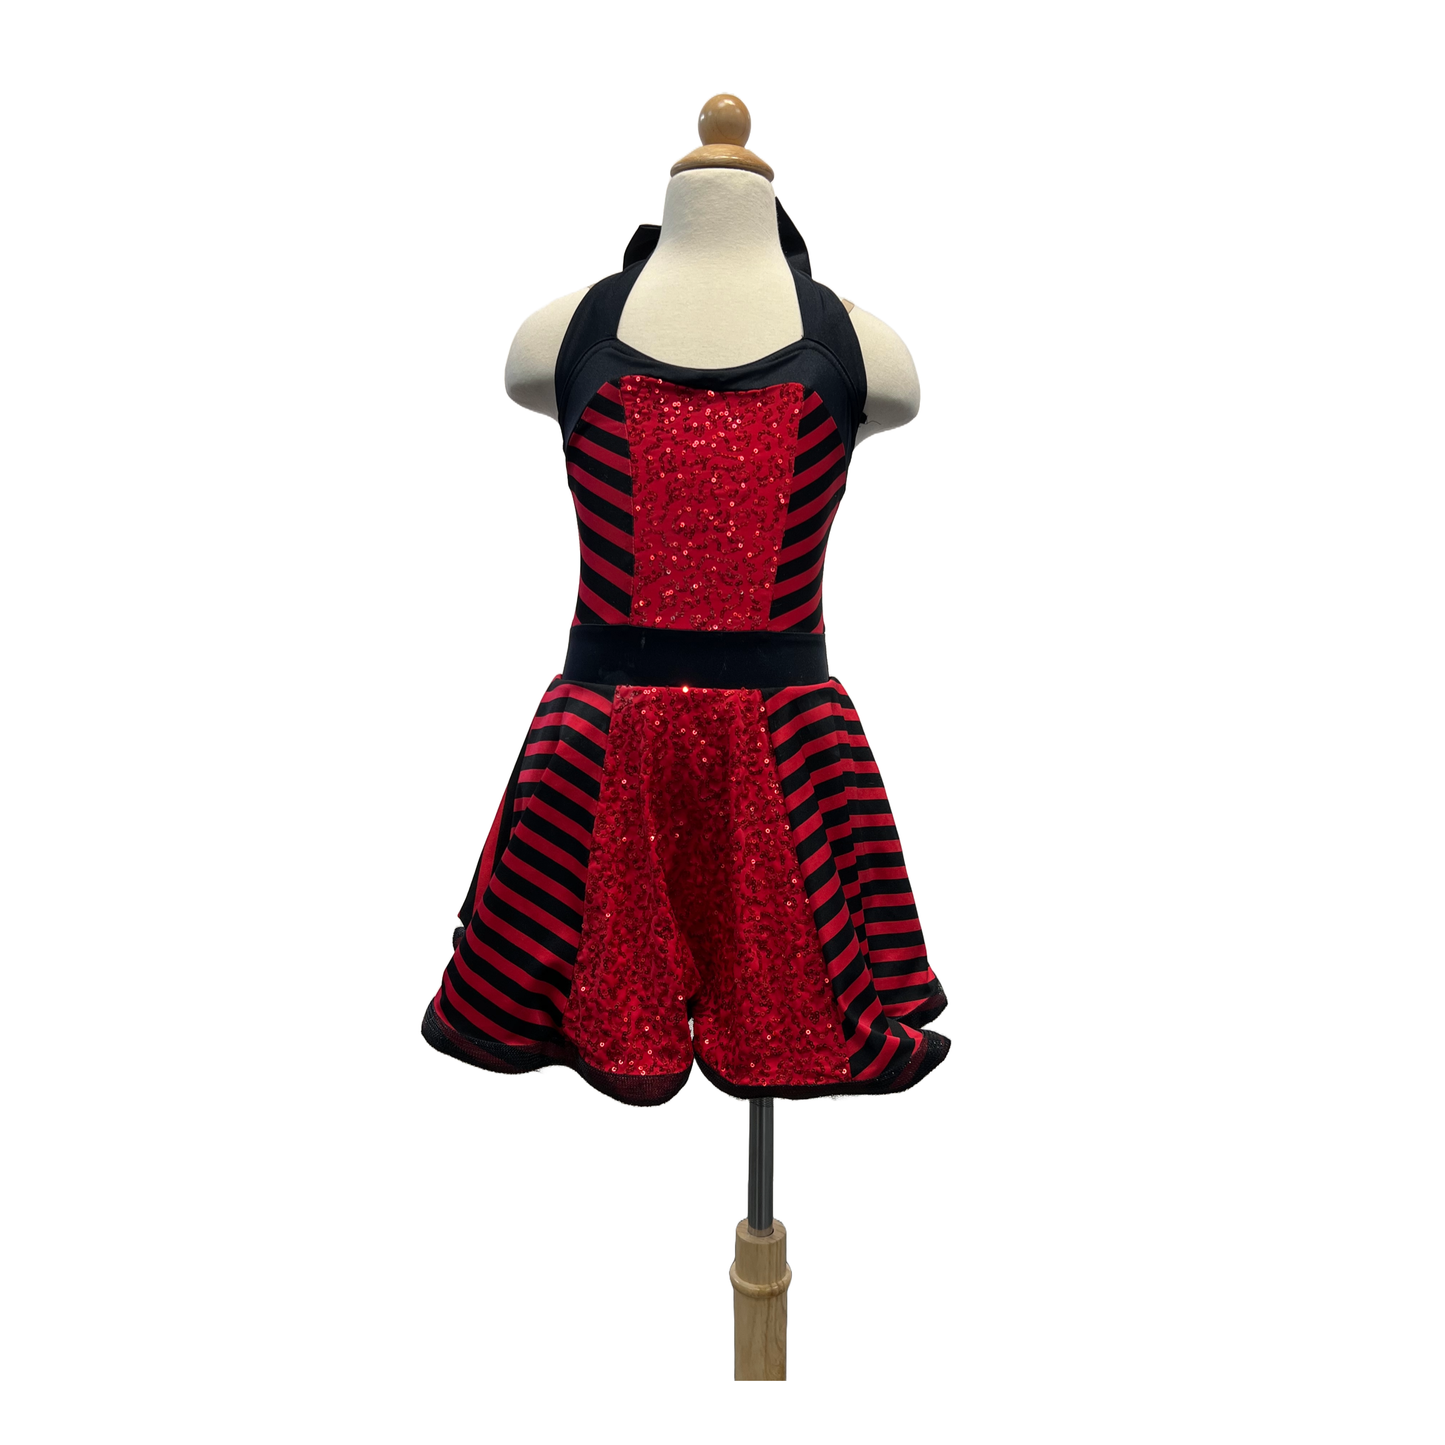 Child Size Red and Black Striped Dress